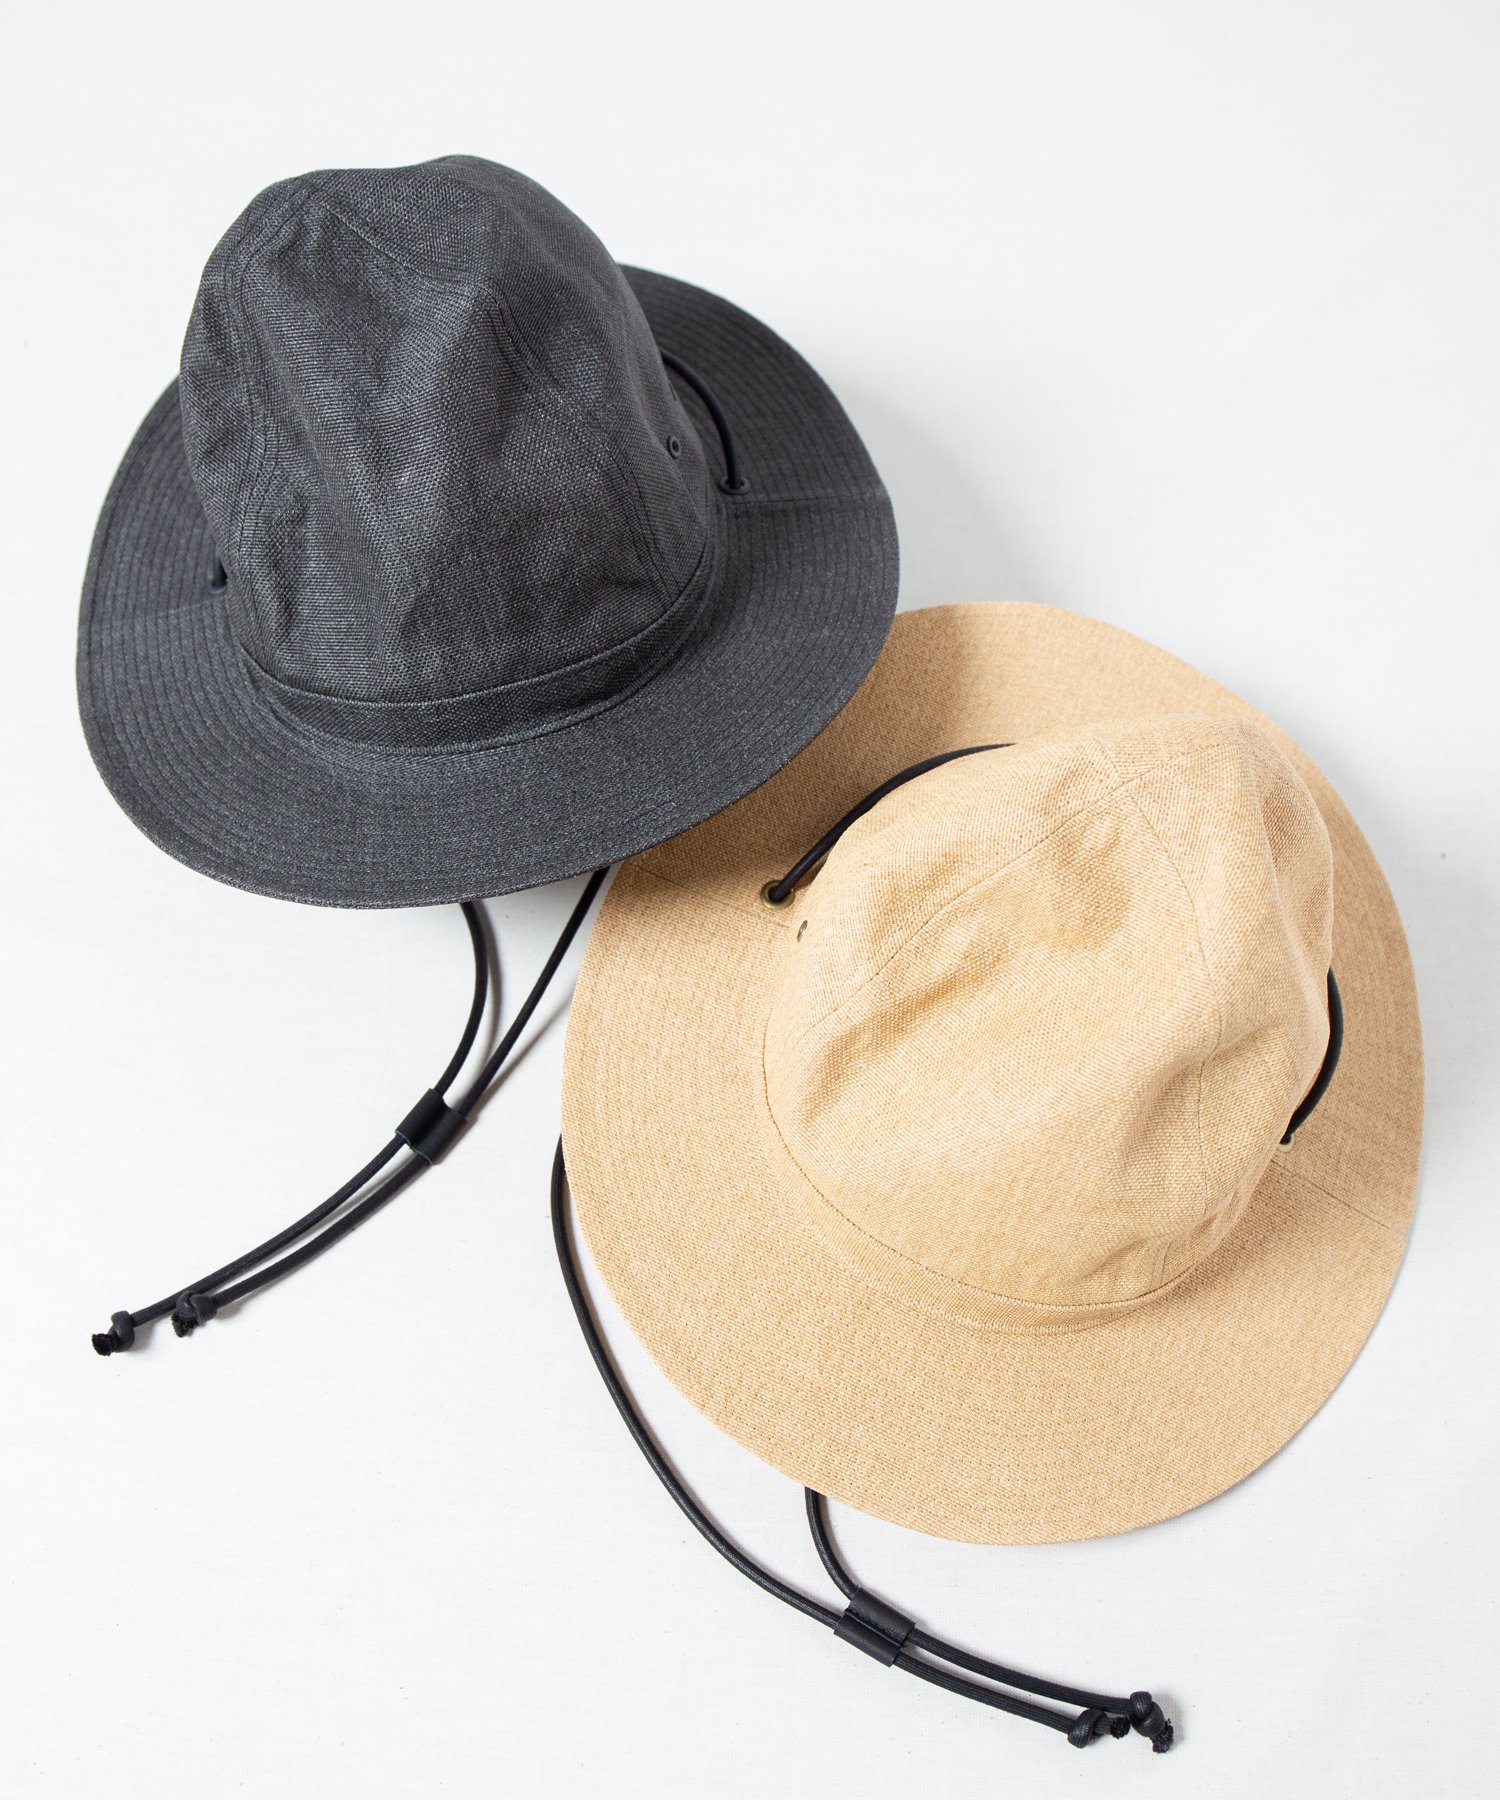 <img class='new_mark_img1' src='https://img.shop-pro.jp/img/new/icons15.gif' style='border:none;display:inline;margin:0px;padding:0px;width:auto;' />【Racal】 Paper Cloth Mountain Hat / ペーパークロスマウンテンハット